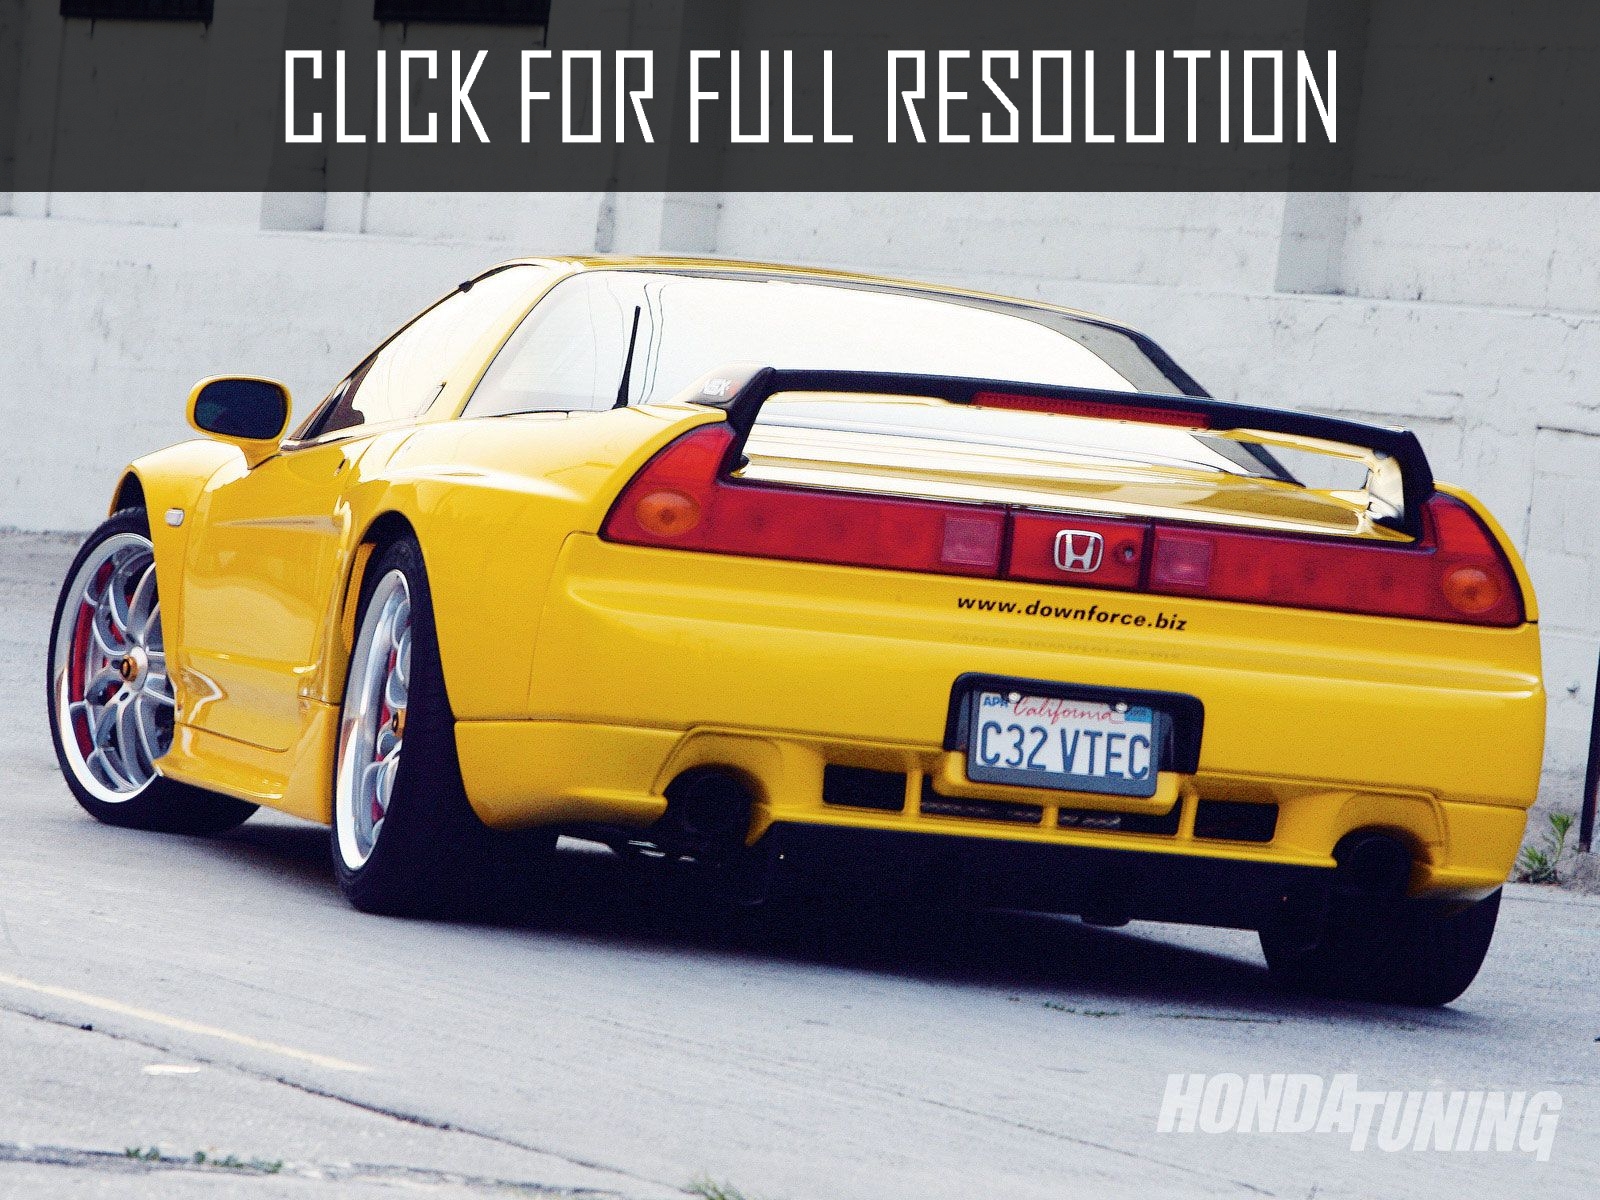 2000 Honda Nsx - news, reviews, msrp, ratings with amazing images